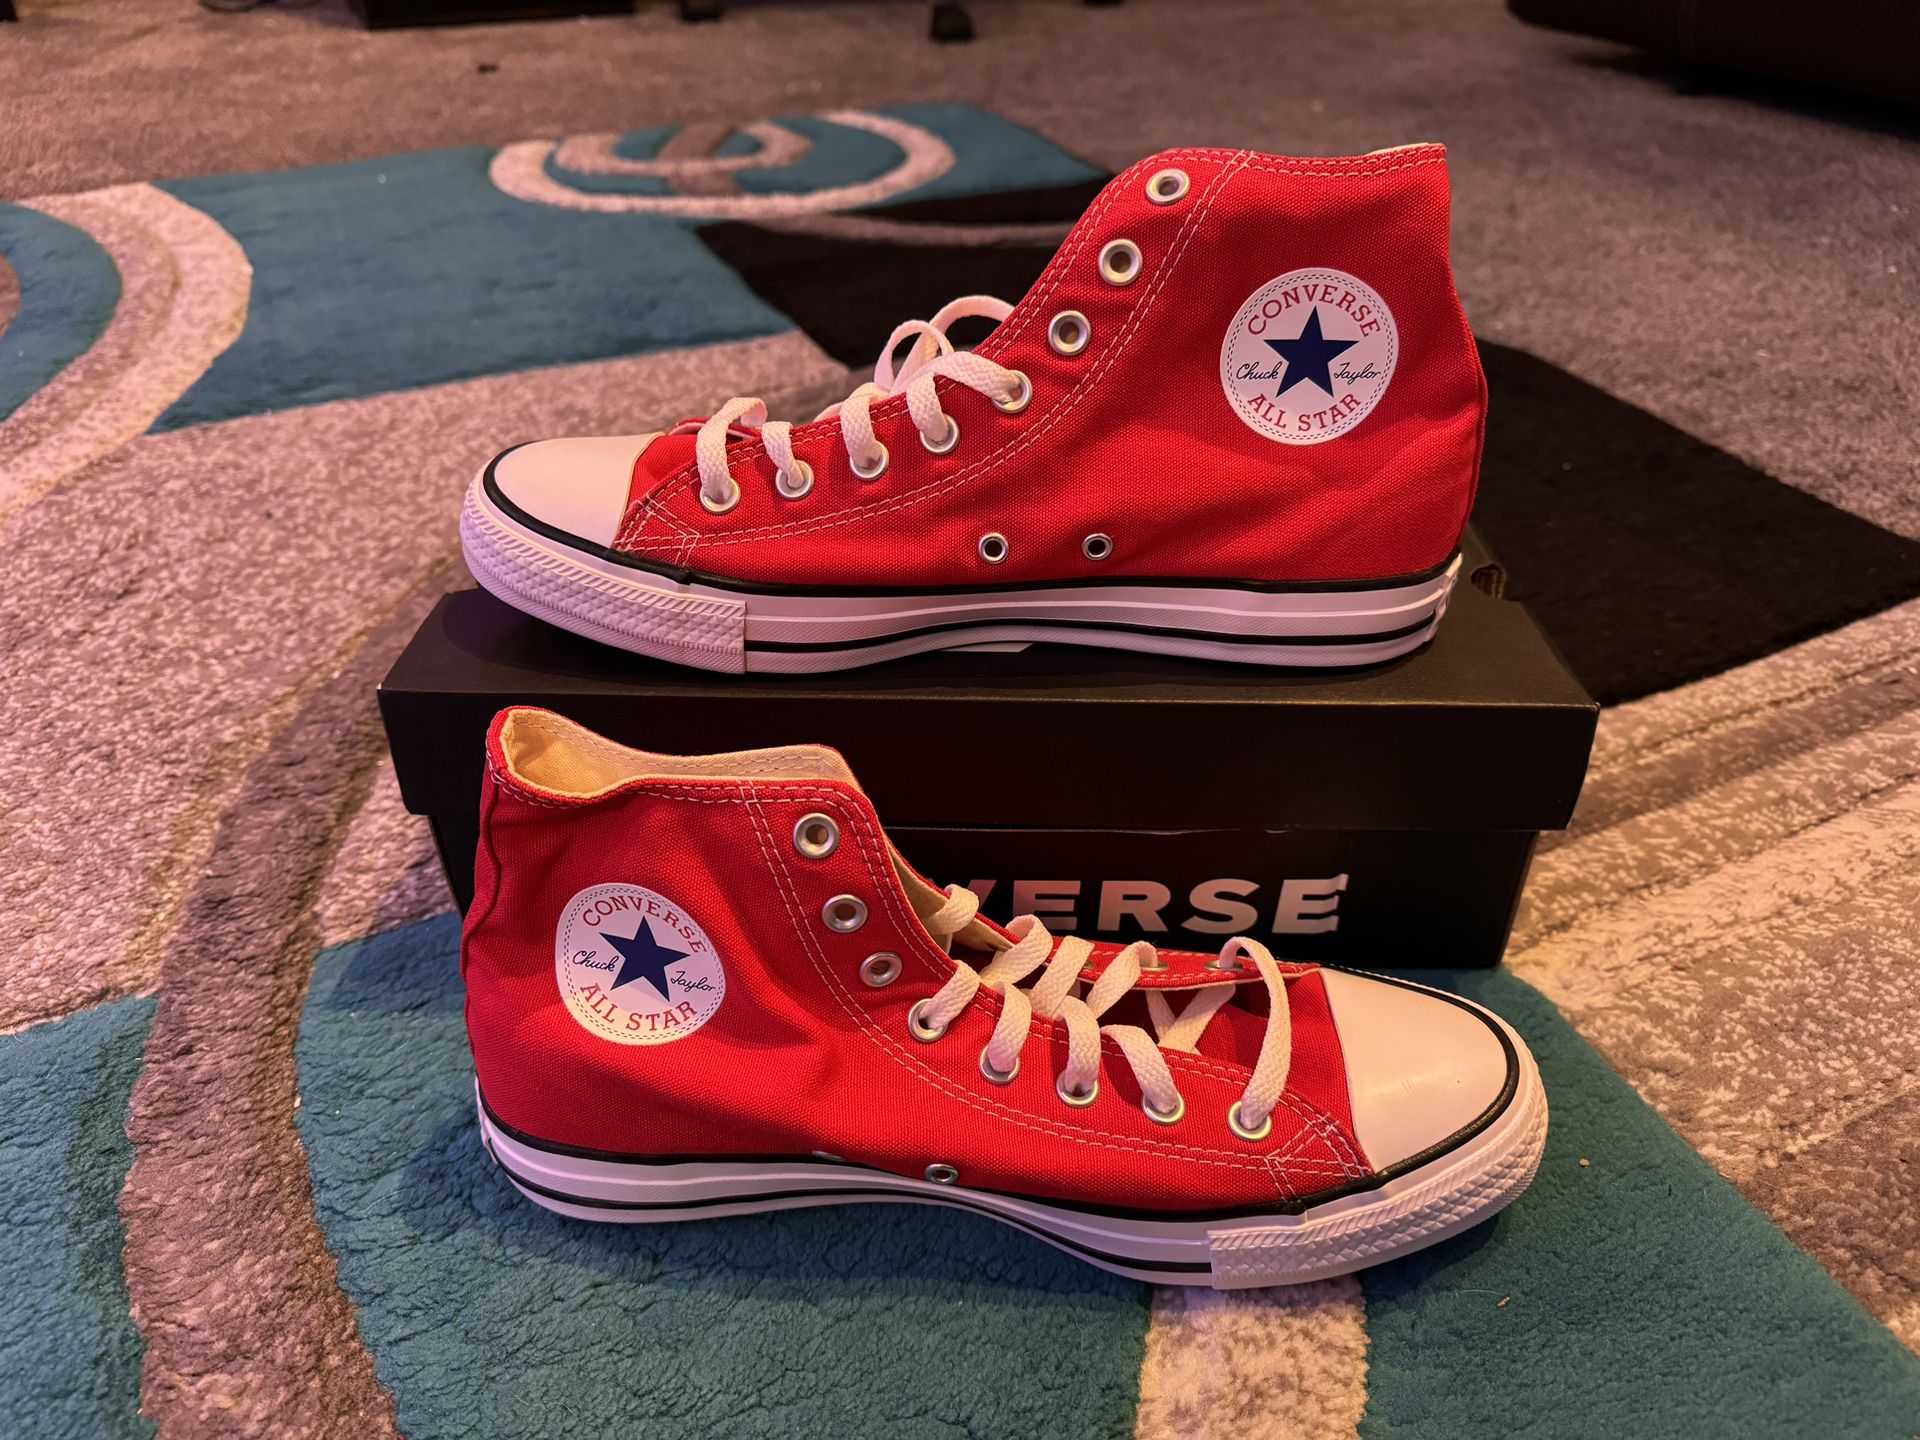 Converse (Red) Never Worn, Brand New!